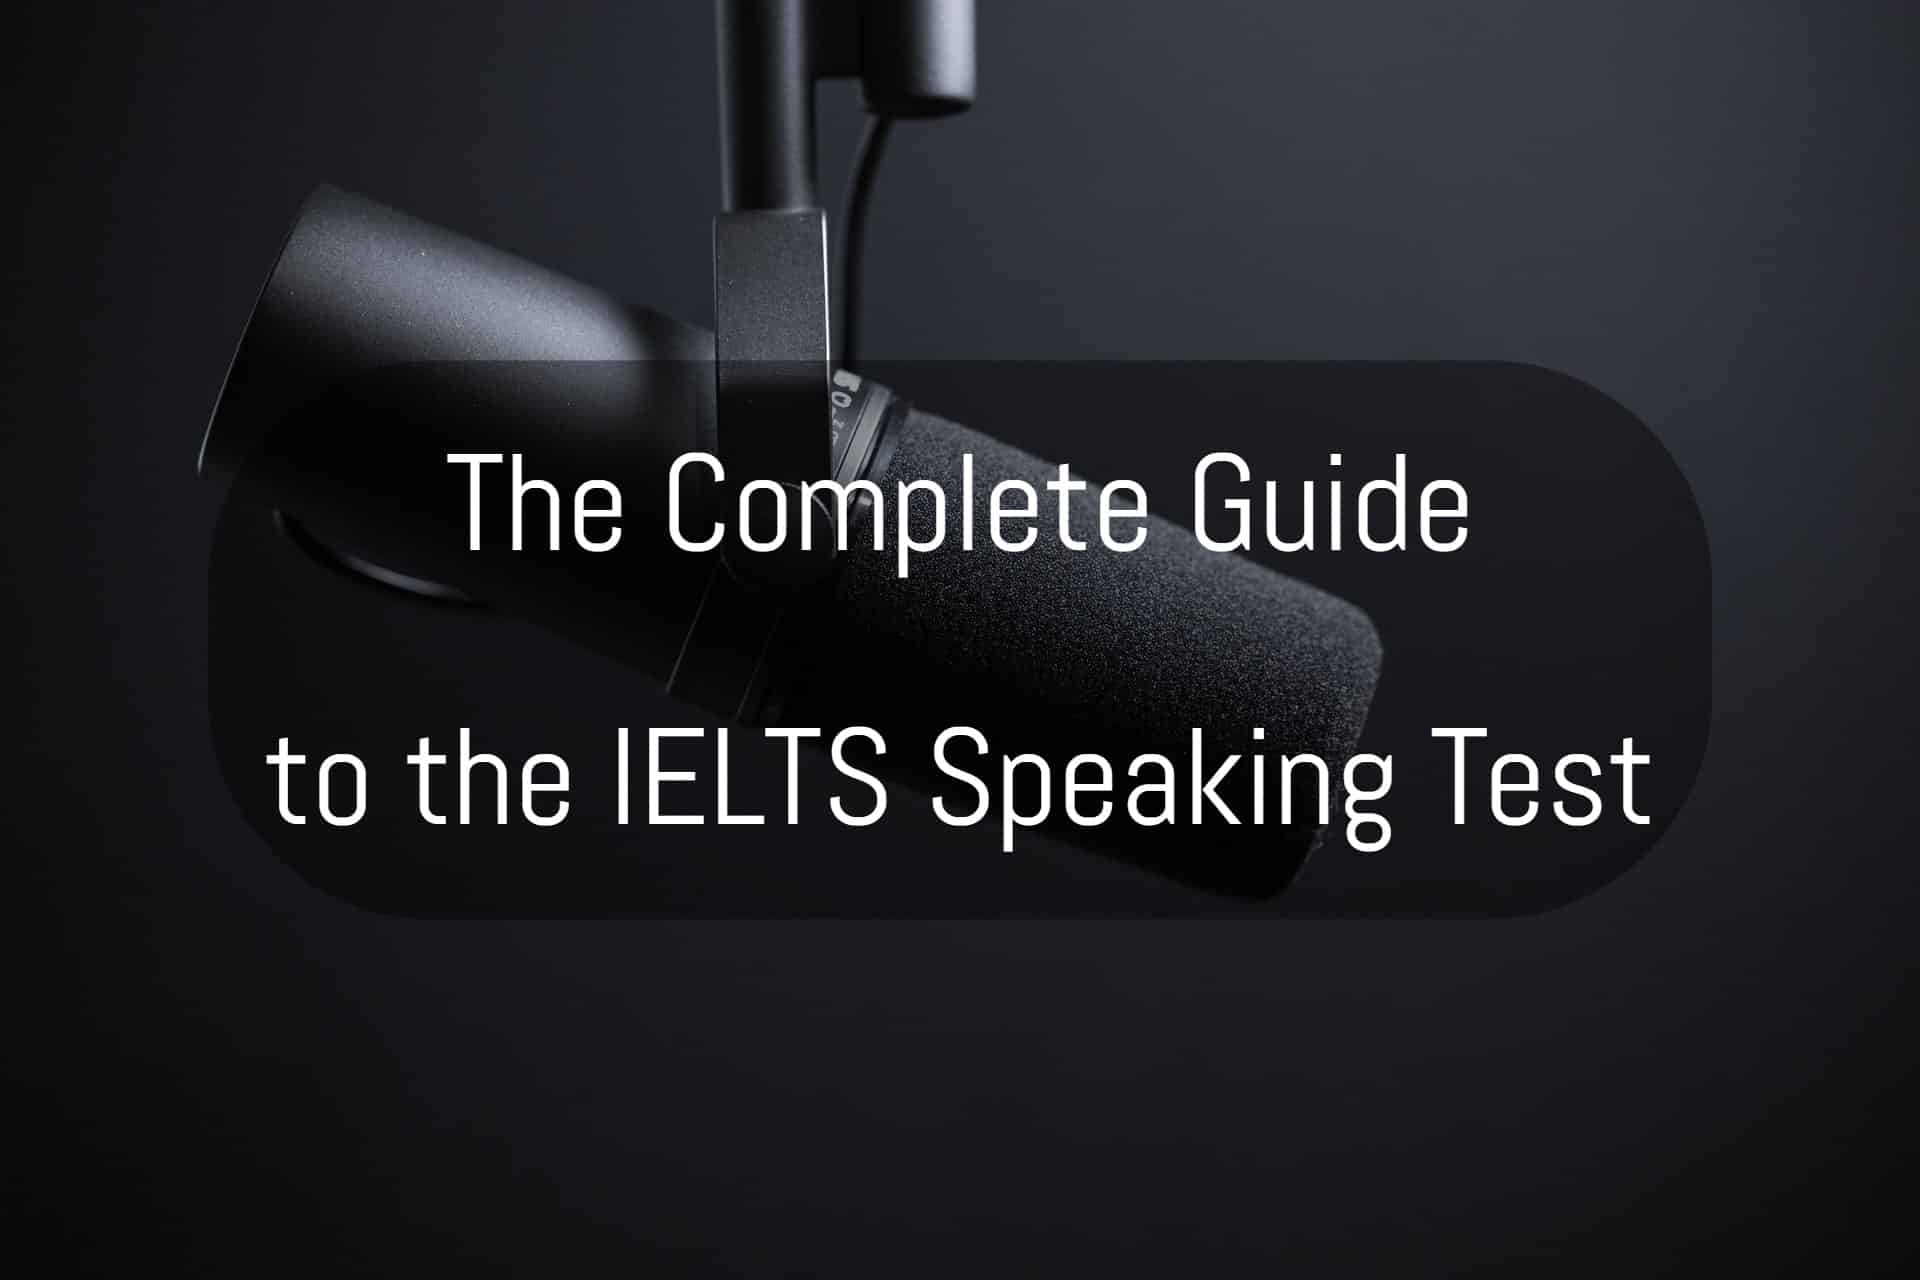 The complete guide to IELTS Speaking